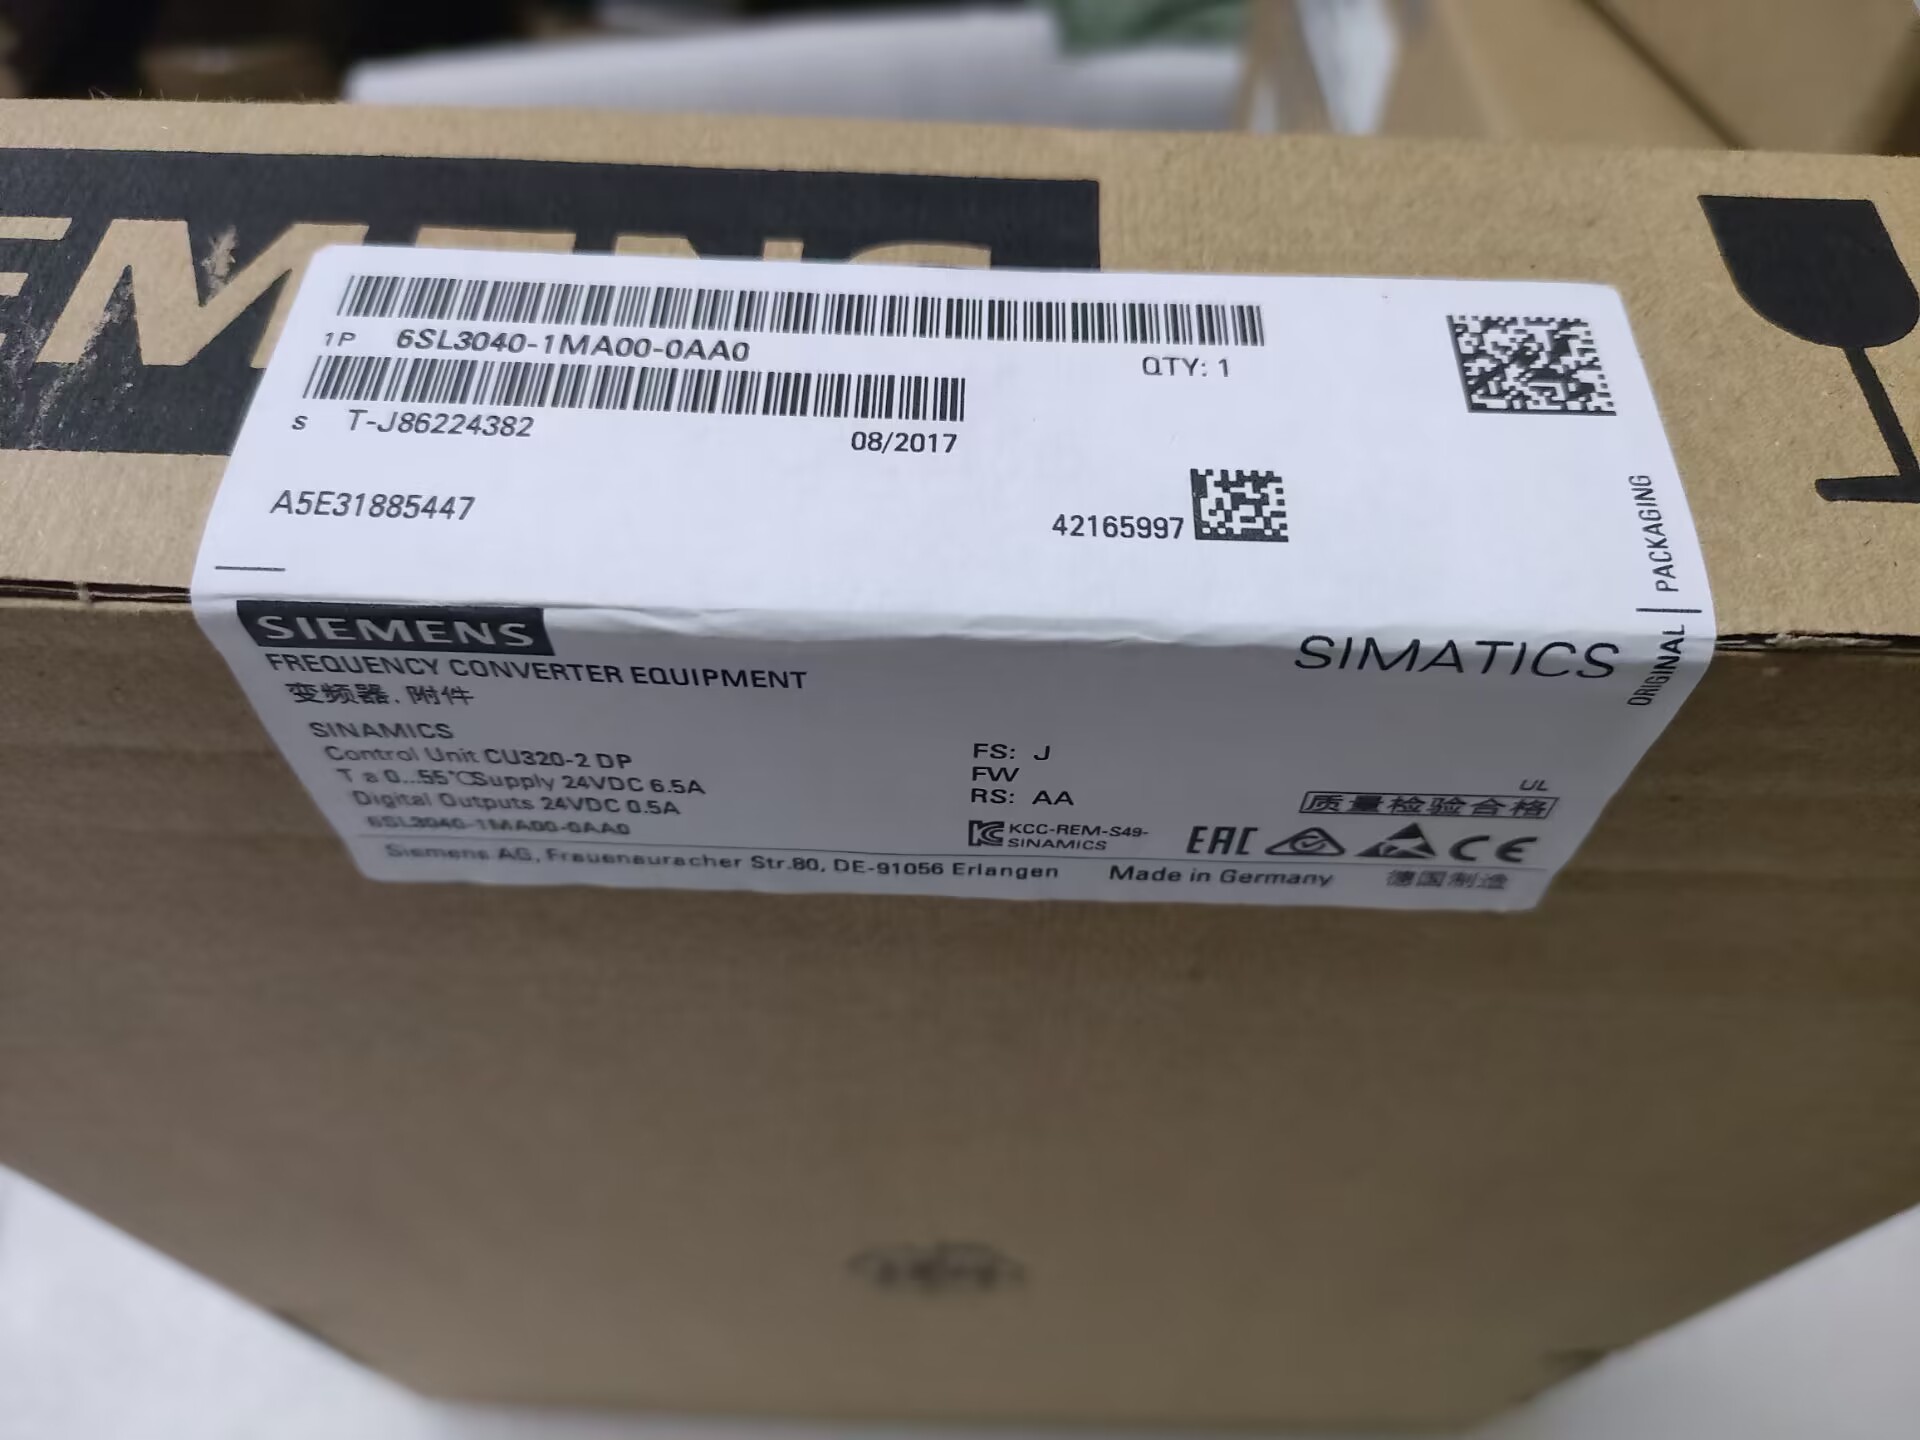 China Siemens 6SL3040-1MA00-0AA0 CU320-2 DP WITH PROFIBUS INTERFACE WITHOUT COMPACT FLASH CARD. factory